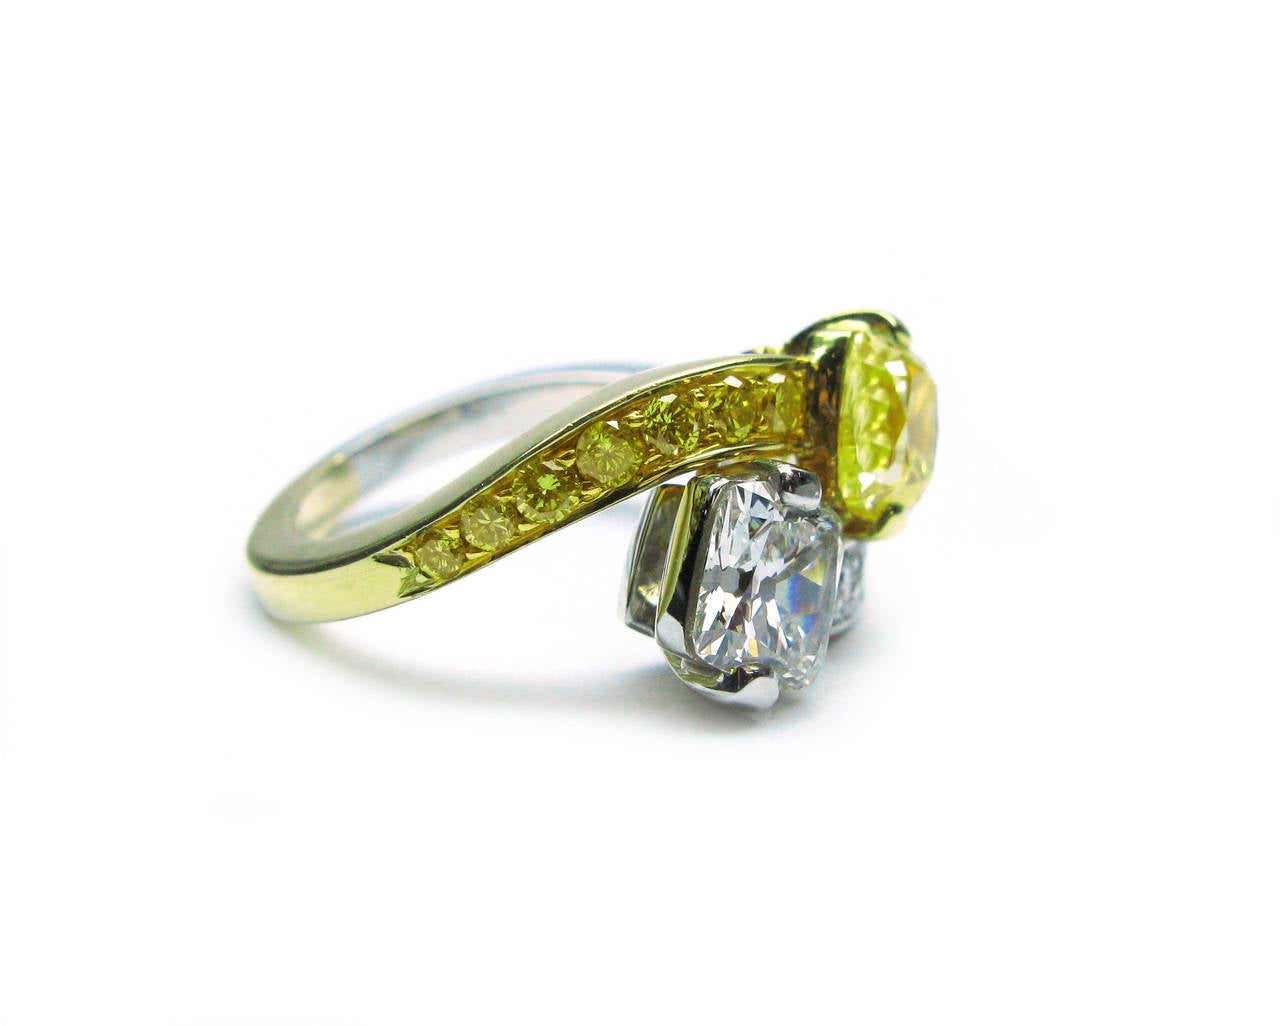 This beautiful one-of-a-kind handmade platinum and 18kt yellow gold twin ring features a 1.25ct, natural fancy yellow color, VS2 clarity, cushion cut diamond and a 0.83ct, G color, SI1 clarity, cushion cut diamond accented with natural fancy yellow